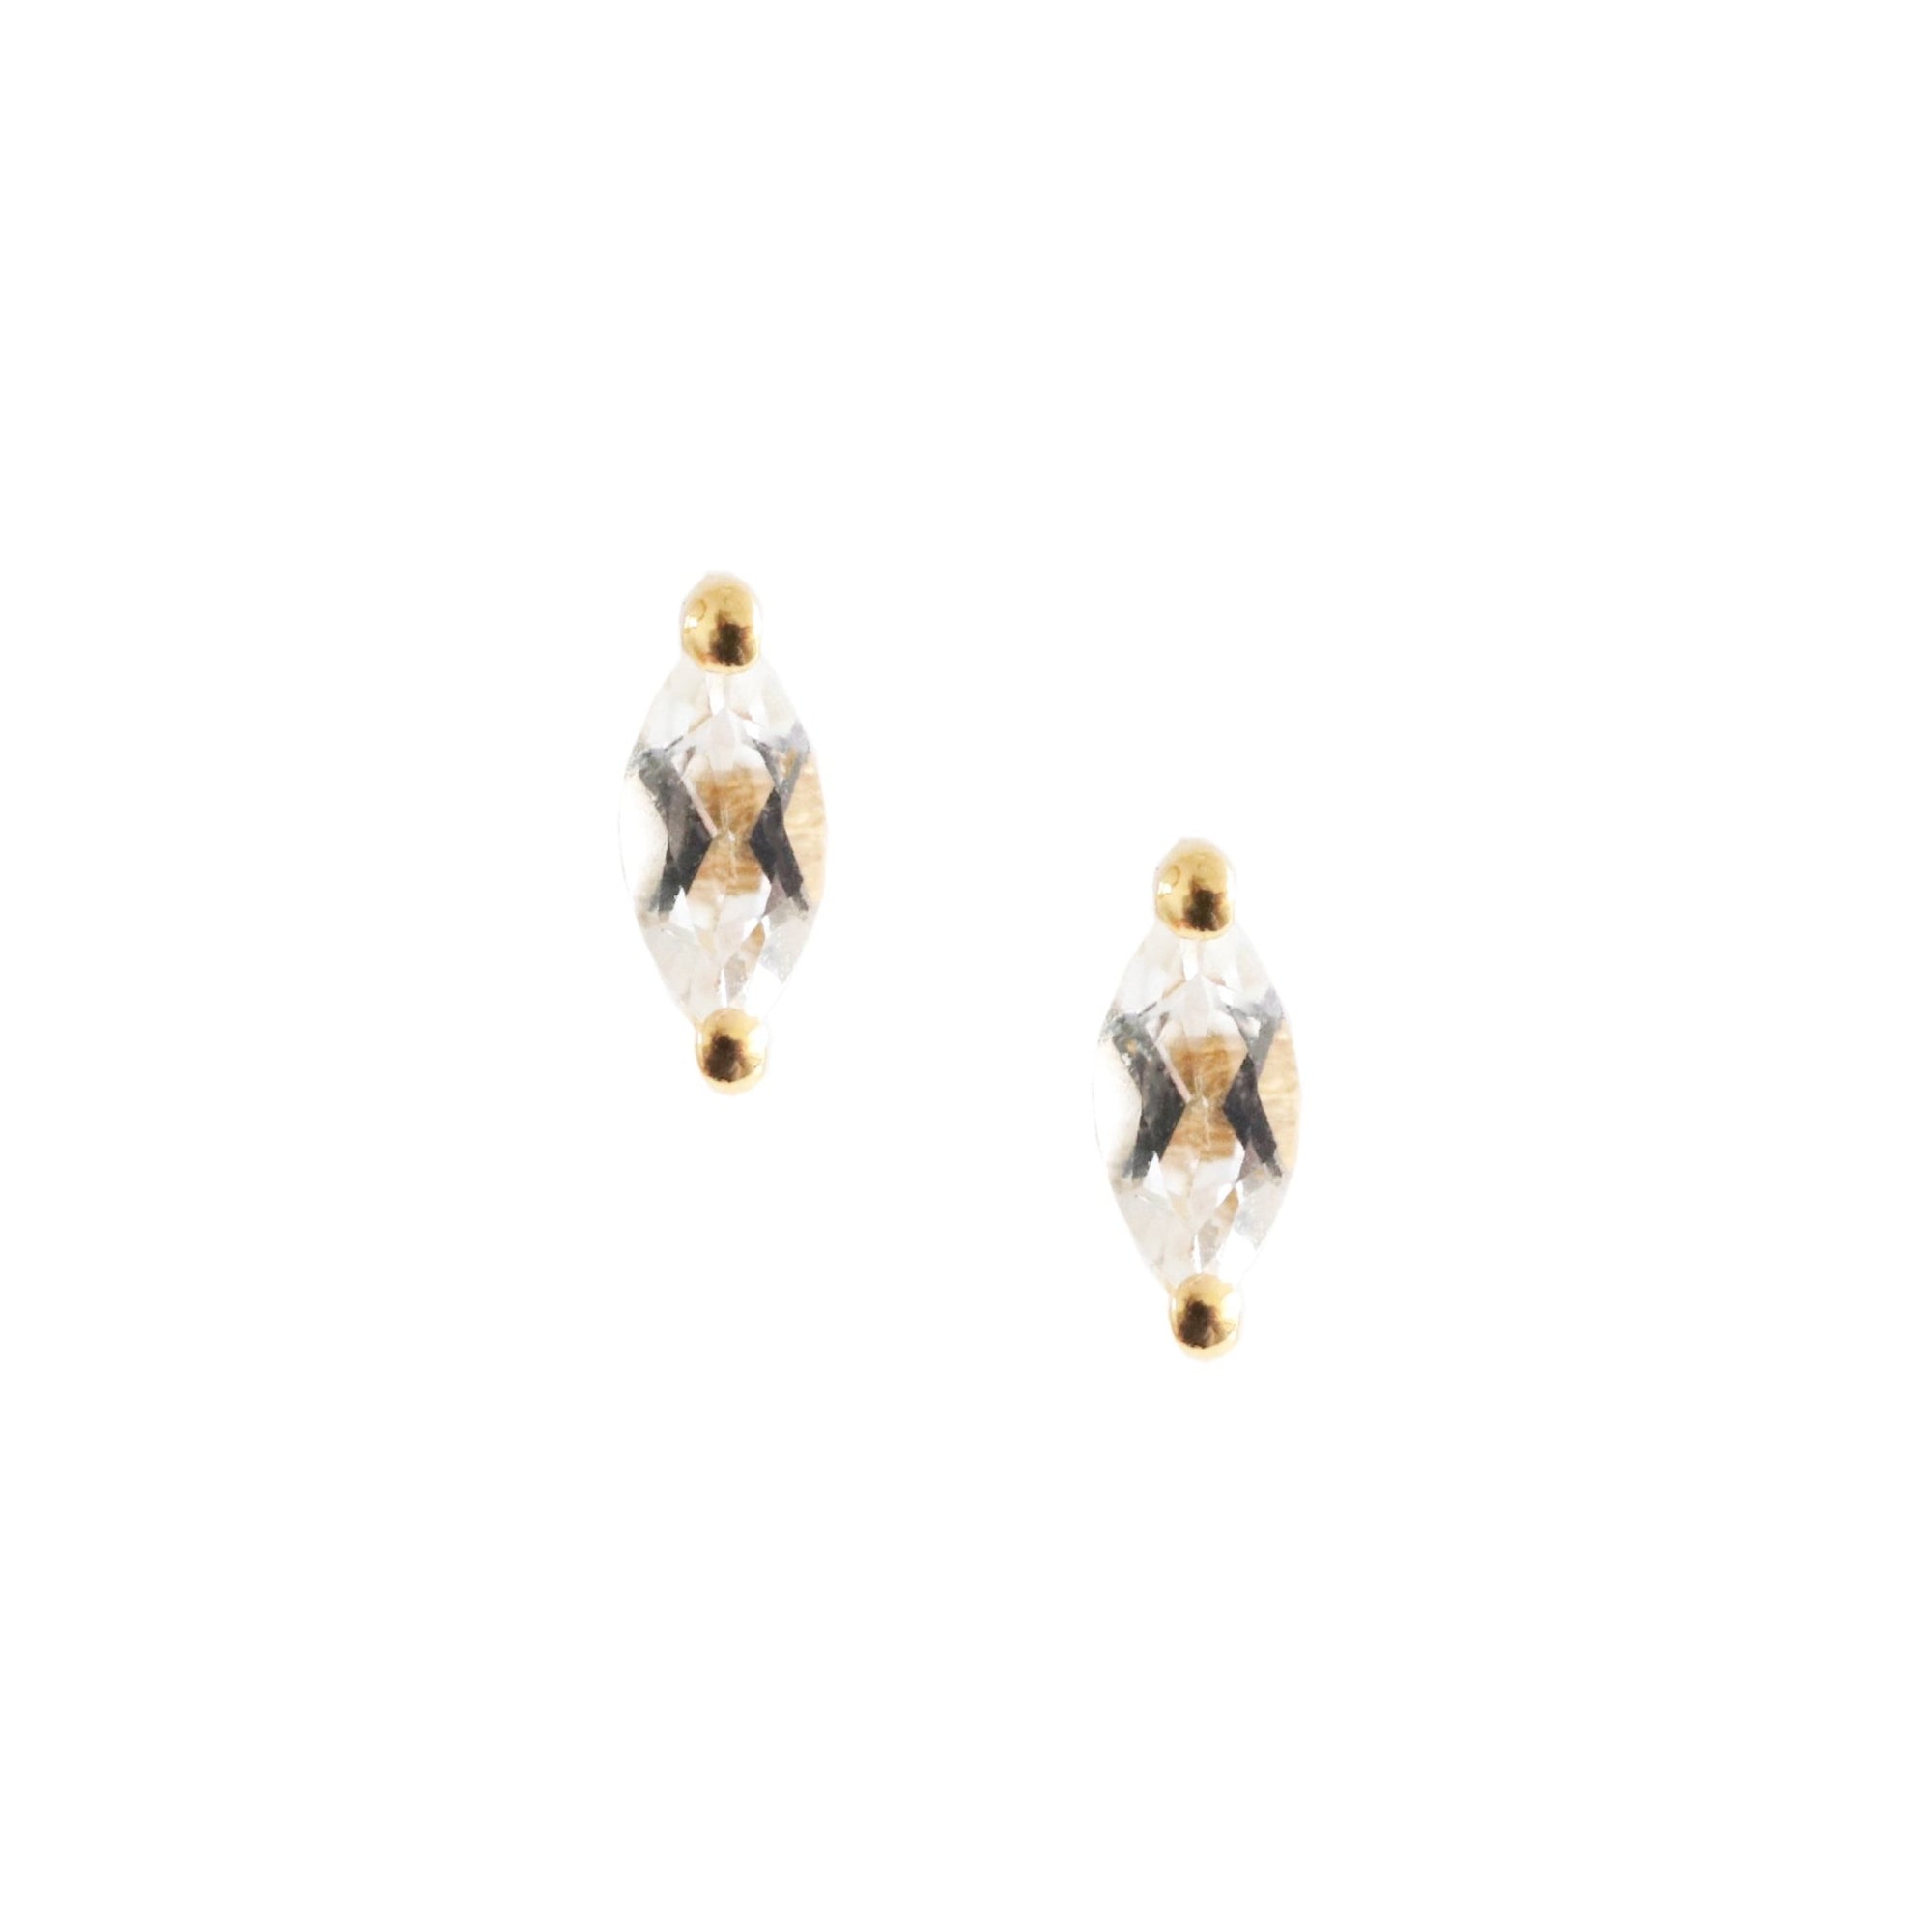 TINY LOVE MARQUIESE STUDS - WHITE TOPAZ & GOLD - SO PRETTY CARA COTTER